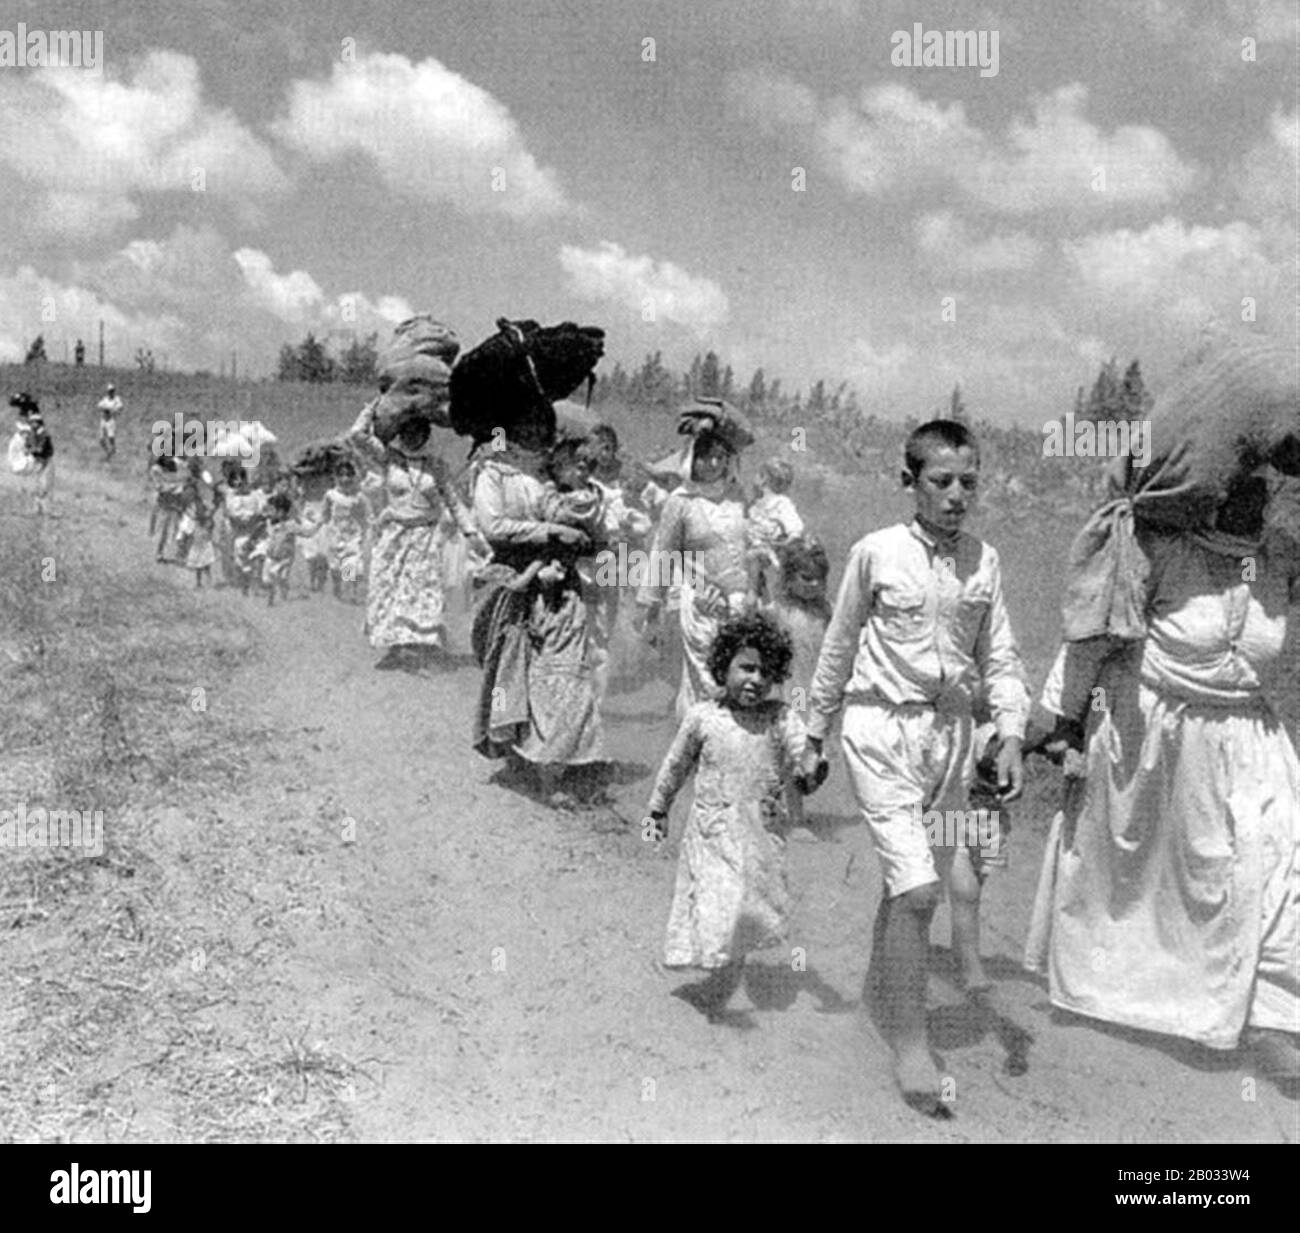 The 1948 Palestinian exodus, known in Arabic as the Nakba (Arabic: النكبة‎,  an-Nakbah, lit.'catastrophe'), occurred when more than 700,000 Palestinian  Arabs fled or were expelled from their homes, during the 1947–1948 Civil